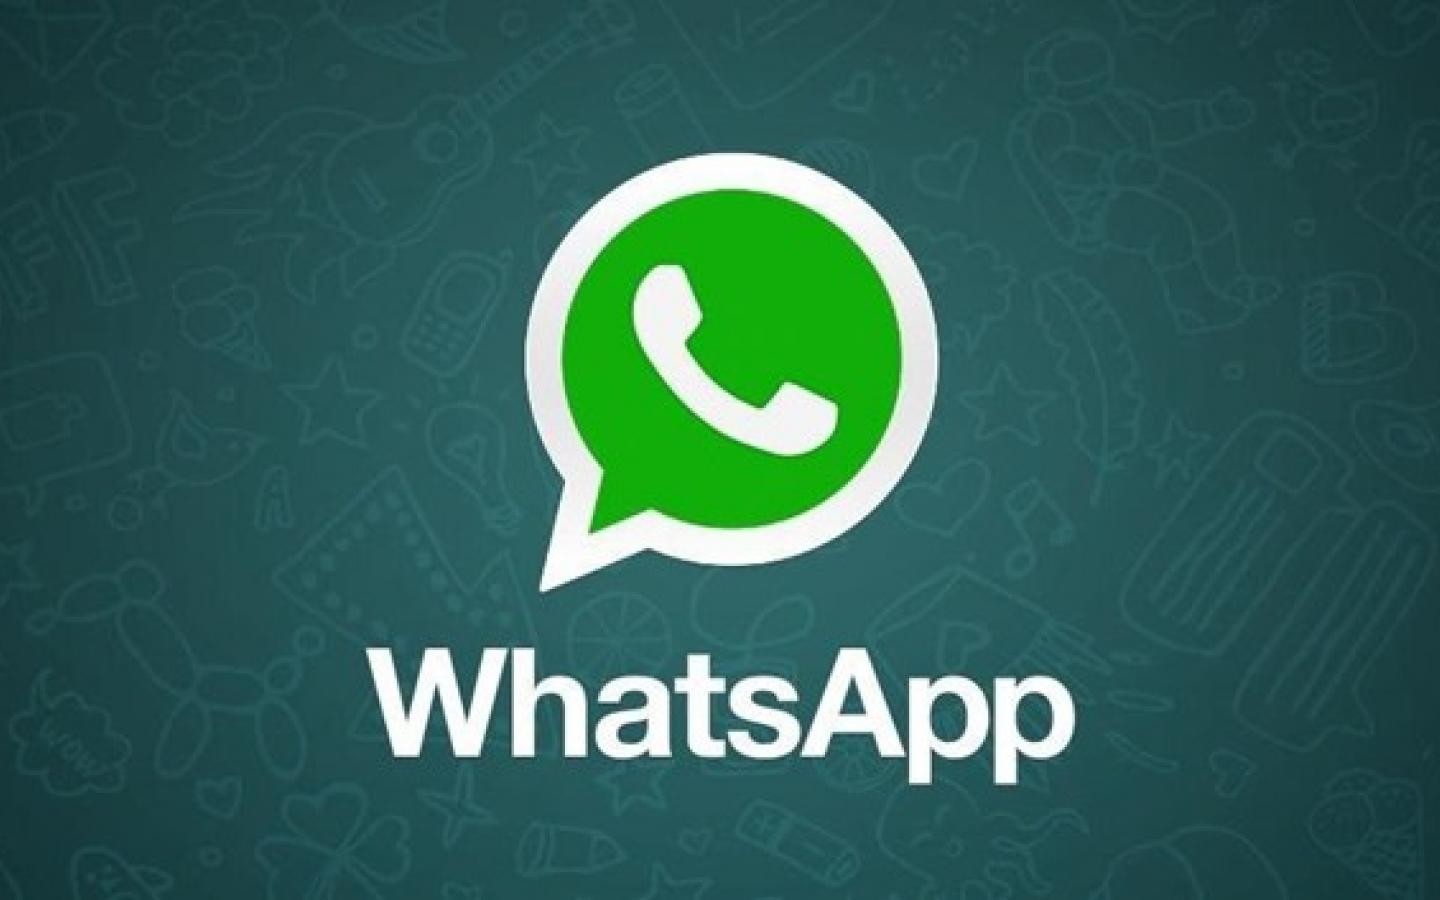 WhatsApp sues Israeli firm NSO Group for spying on 1400 users including journalists, activists